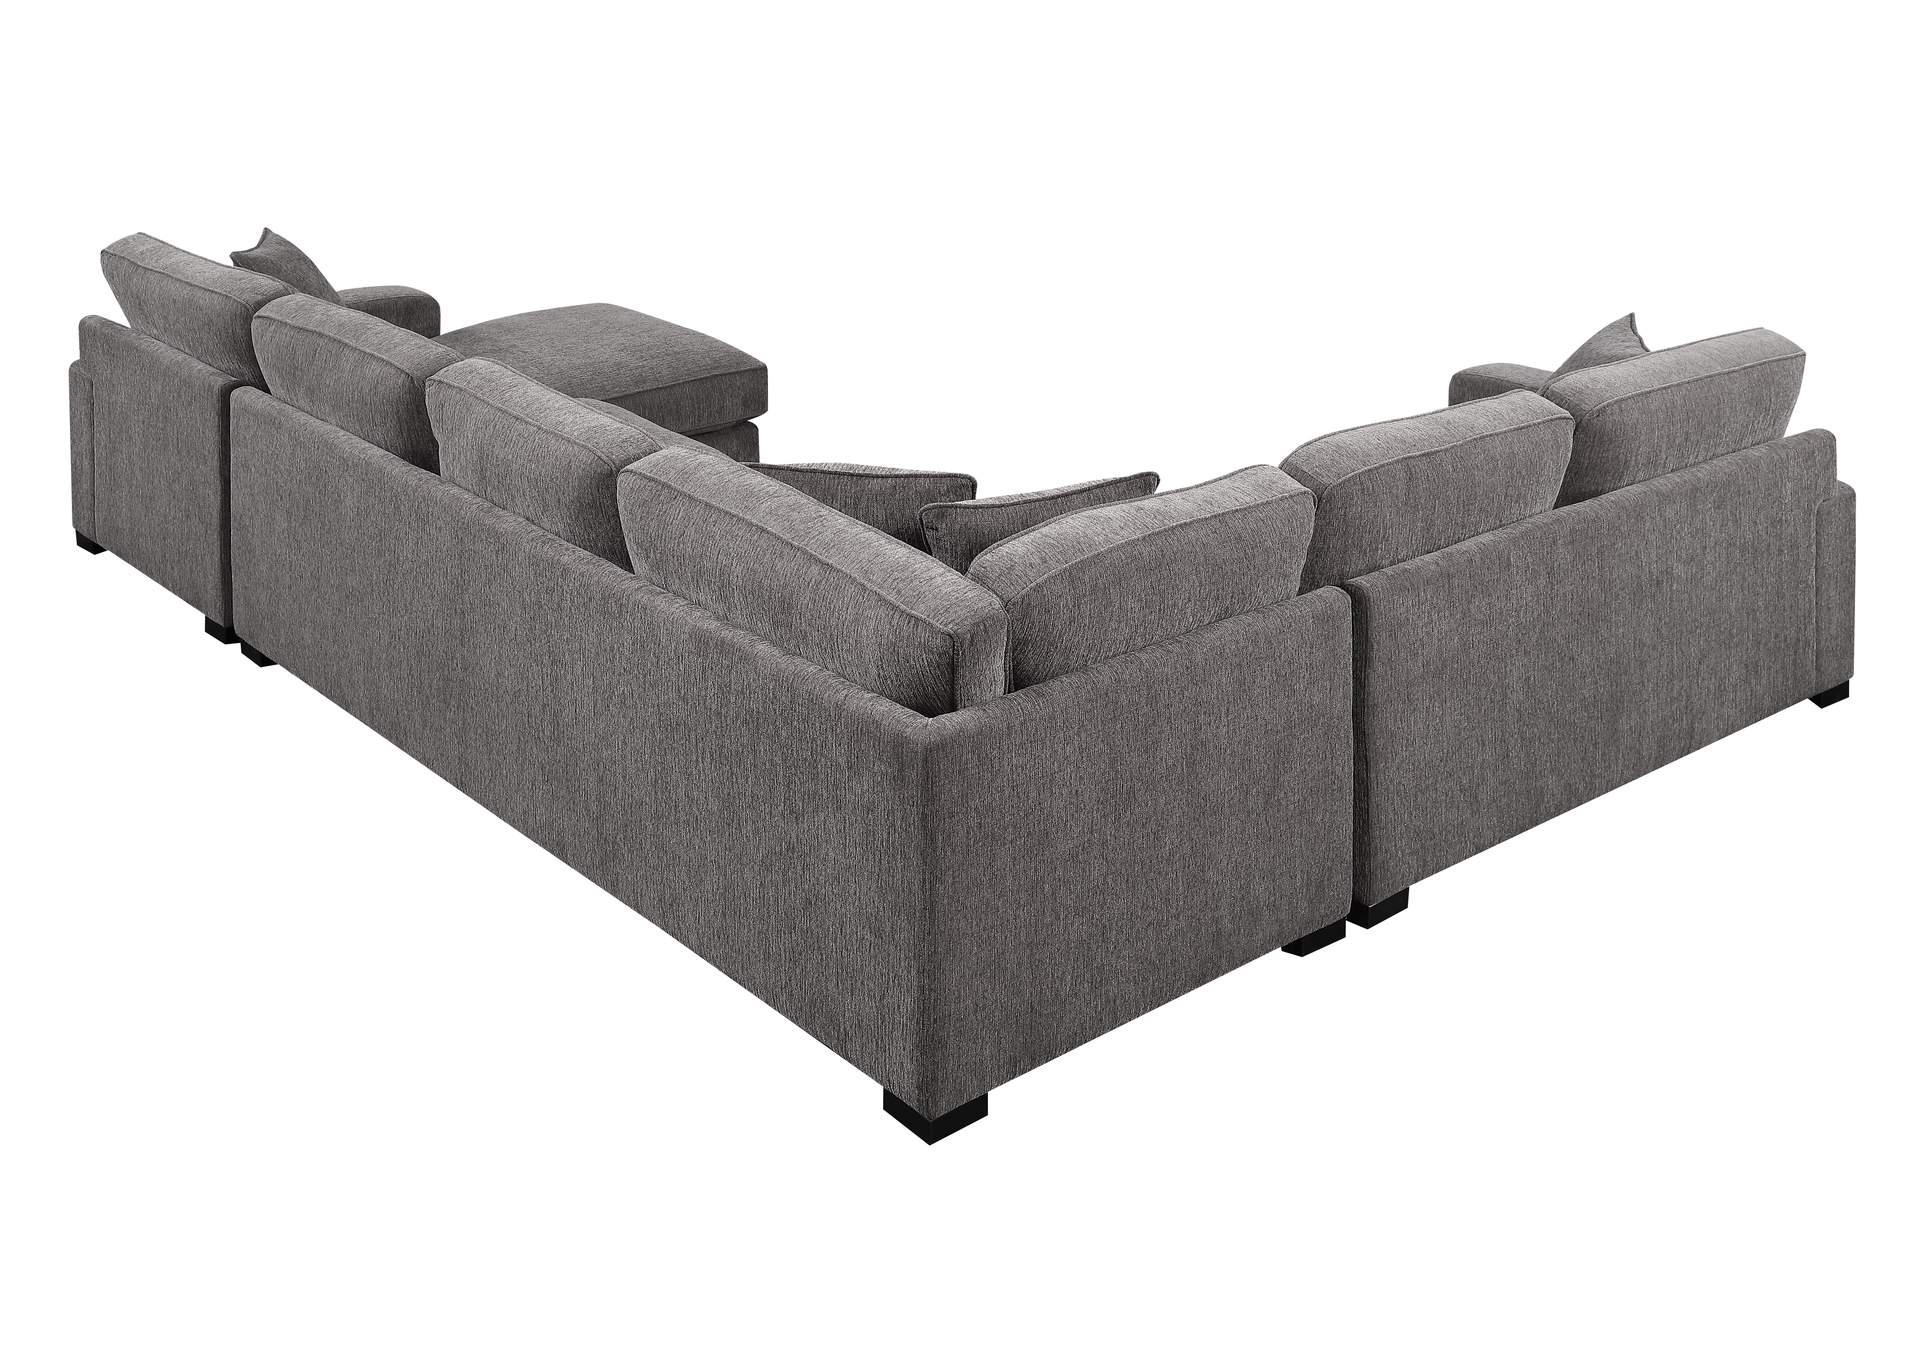 Repose 3 Piece Sectional,Emerald Home Furnishings